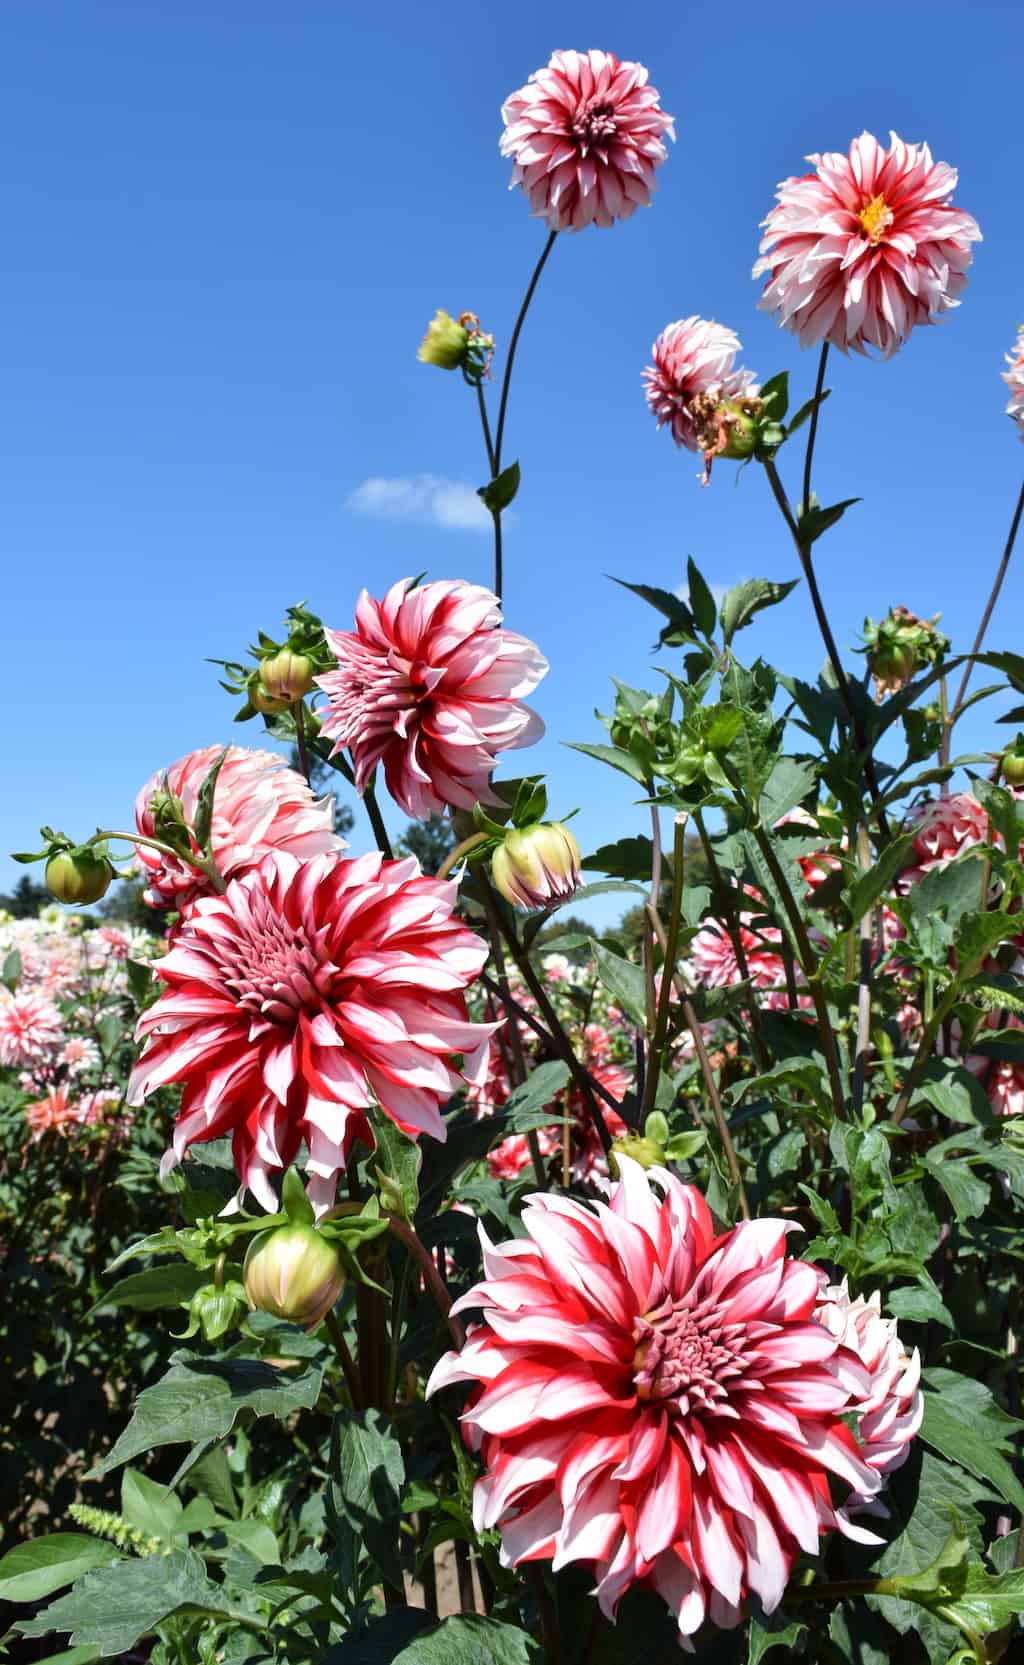 Swan Island Dhalia Farm near Portland, Oregon is the country's largest dahlia farm and hosts a FREE festival every summer. To & Fro Fam